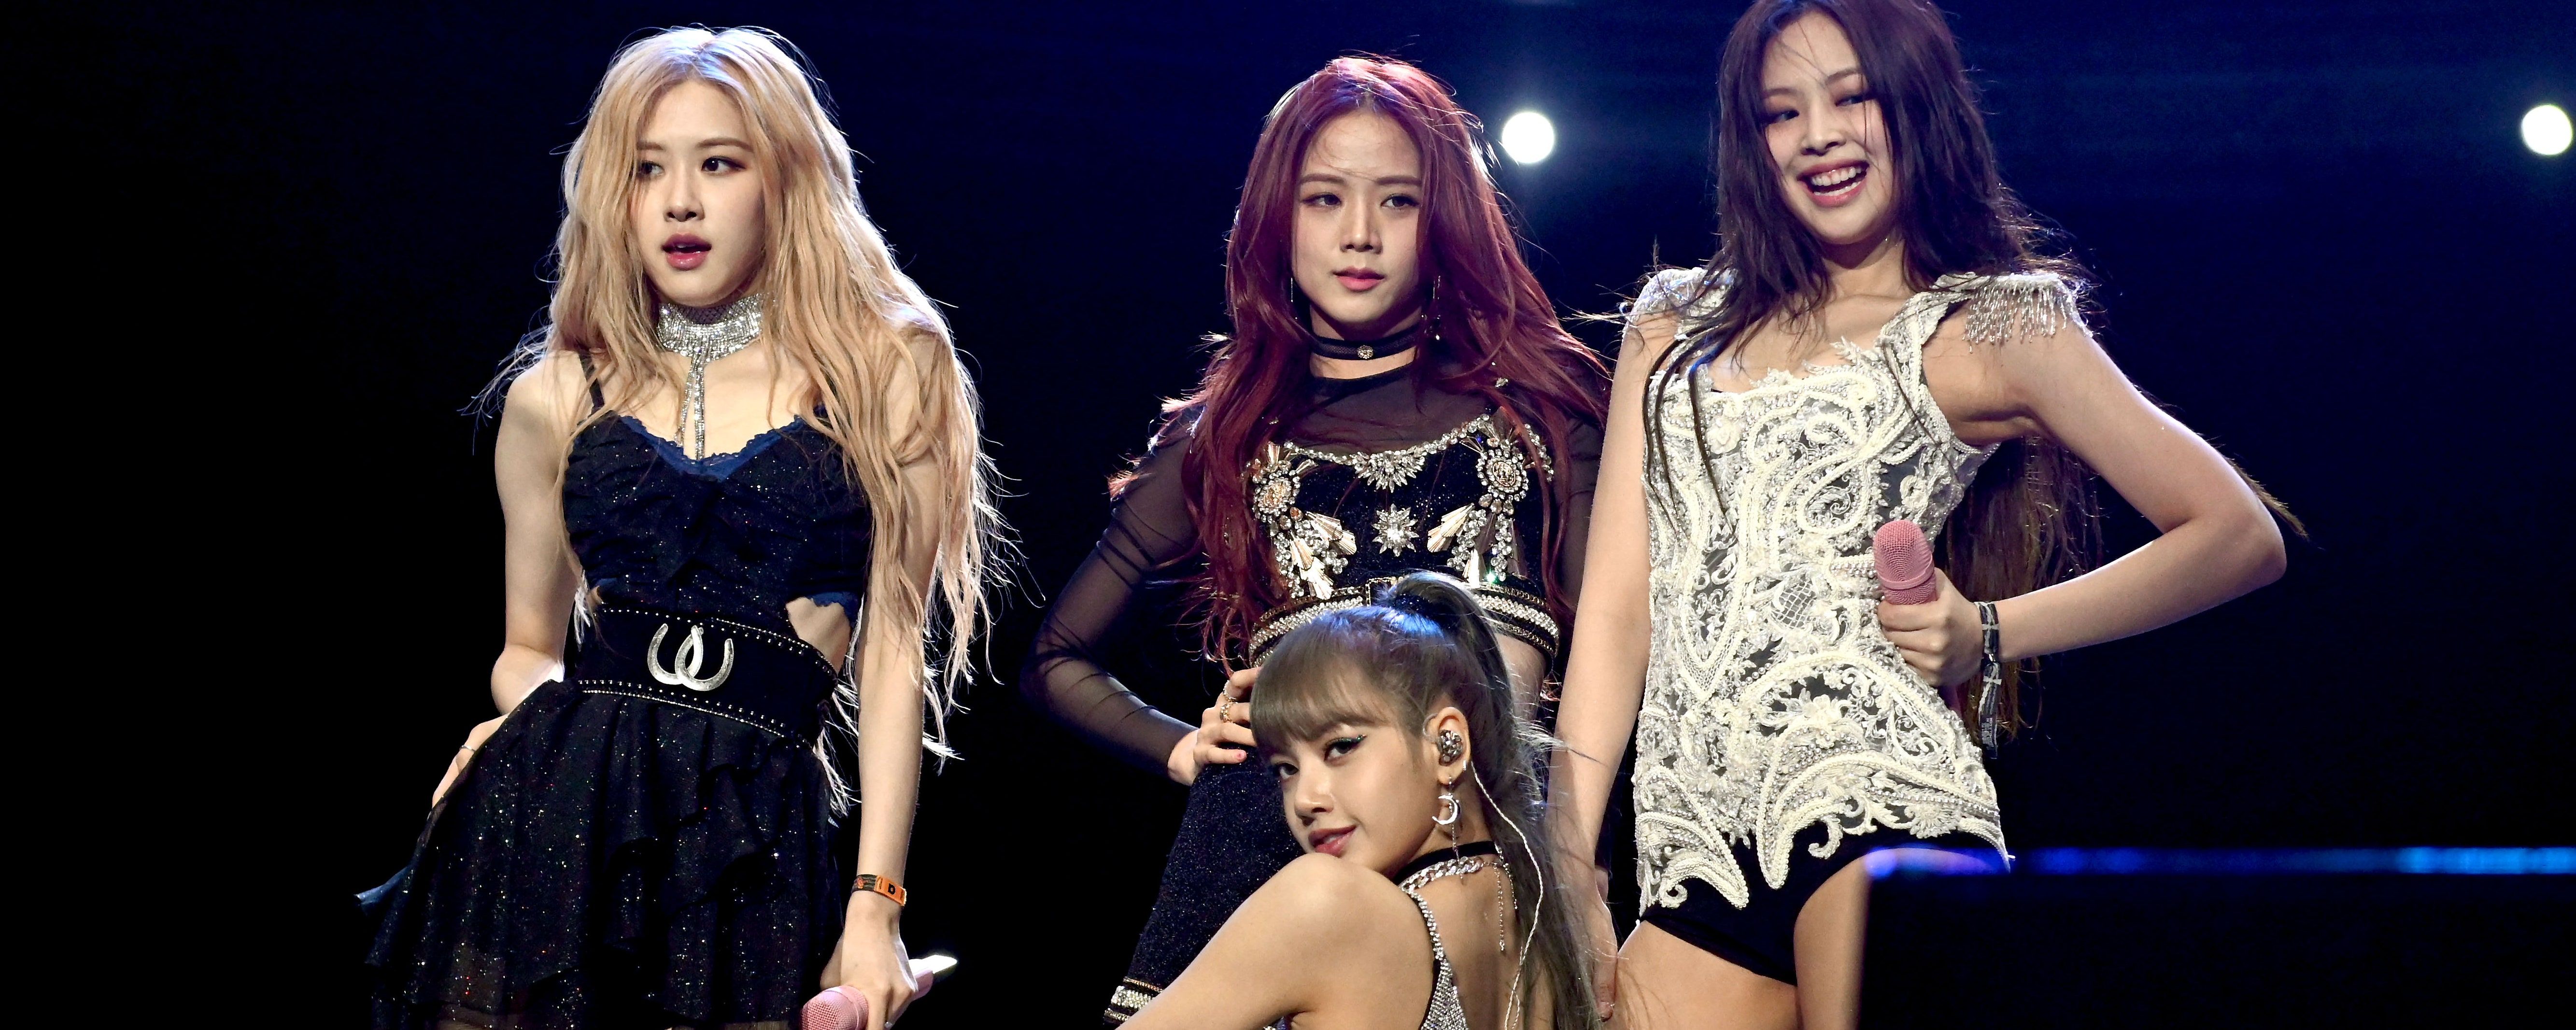 BLACKPINK Just Became The First Female K Pop Group To Perform At